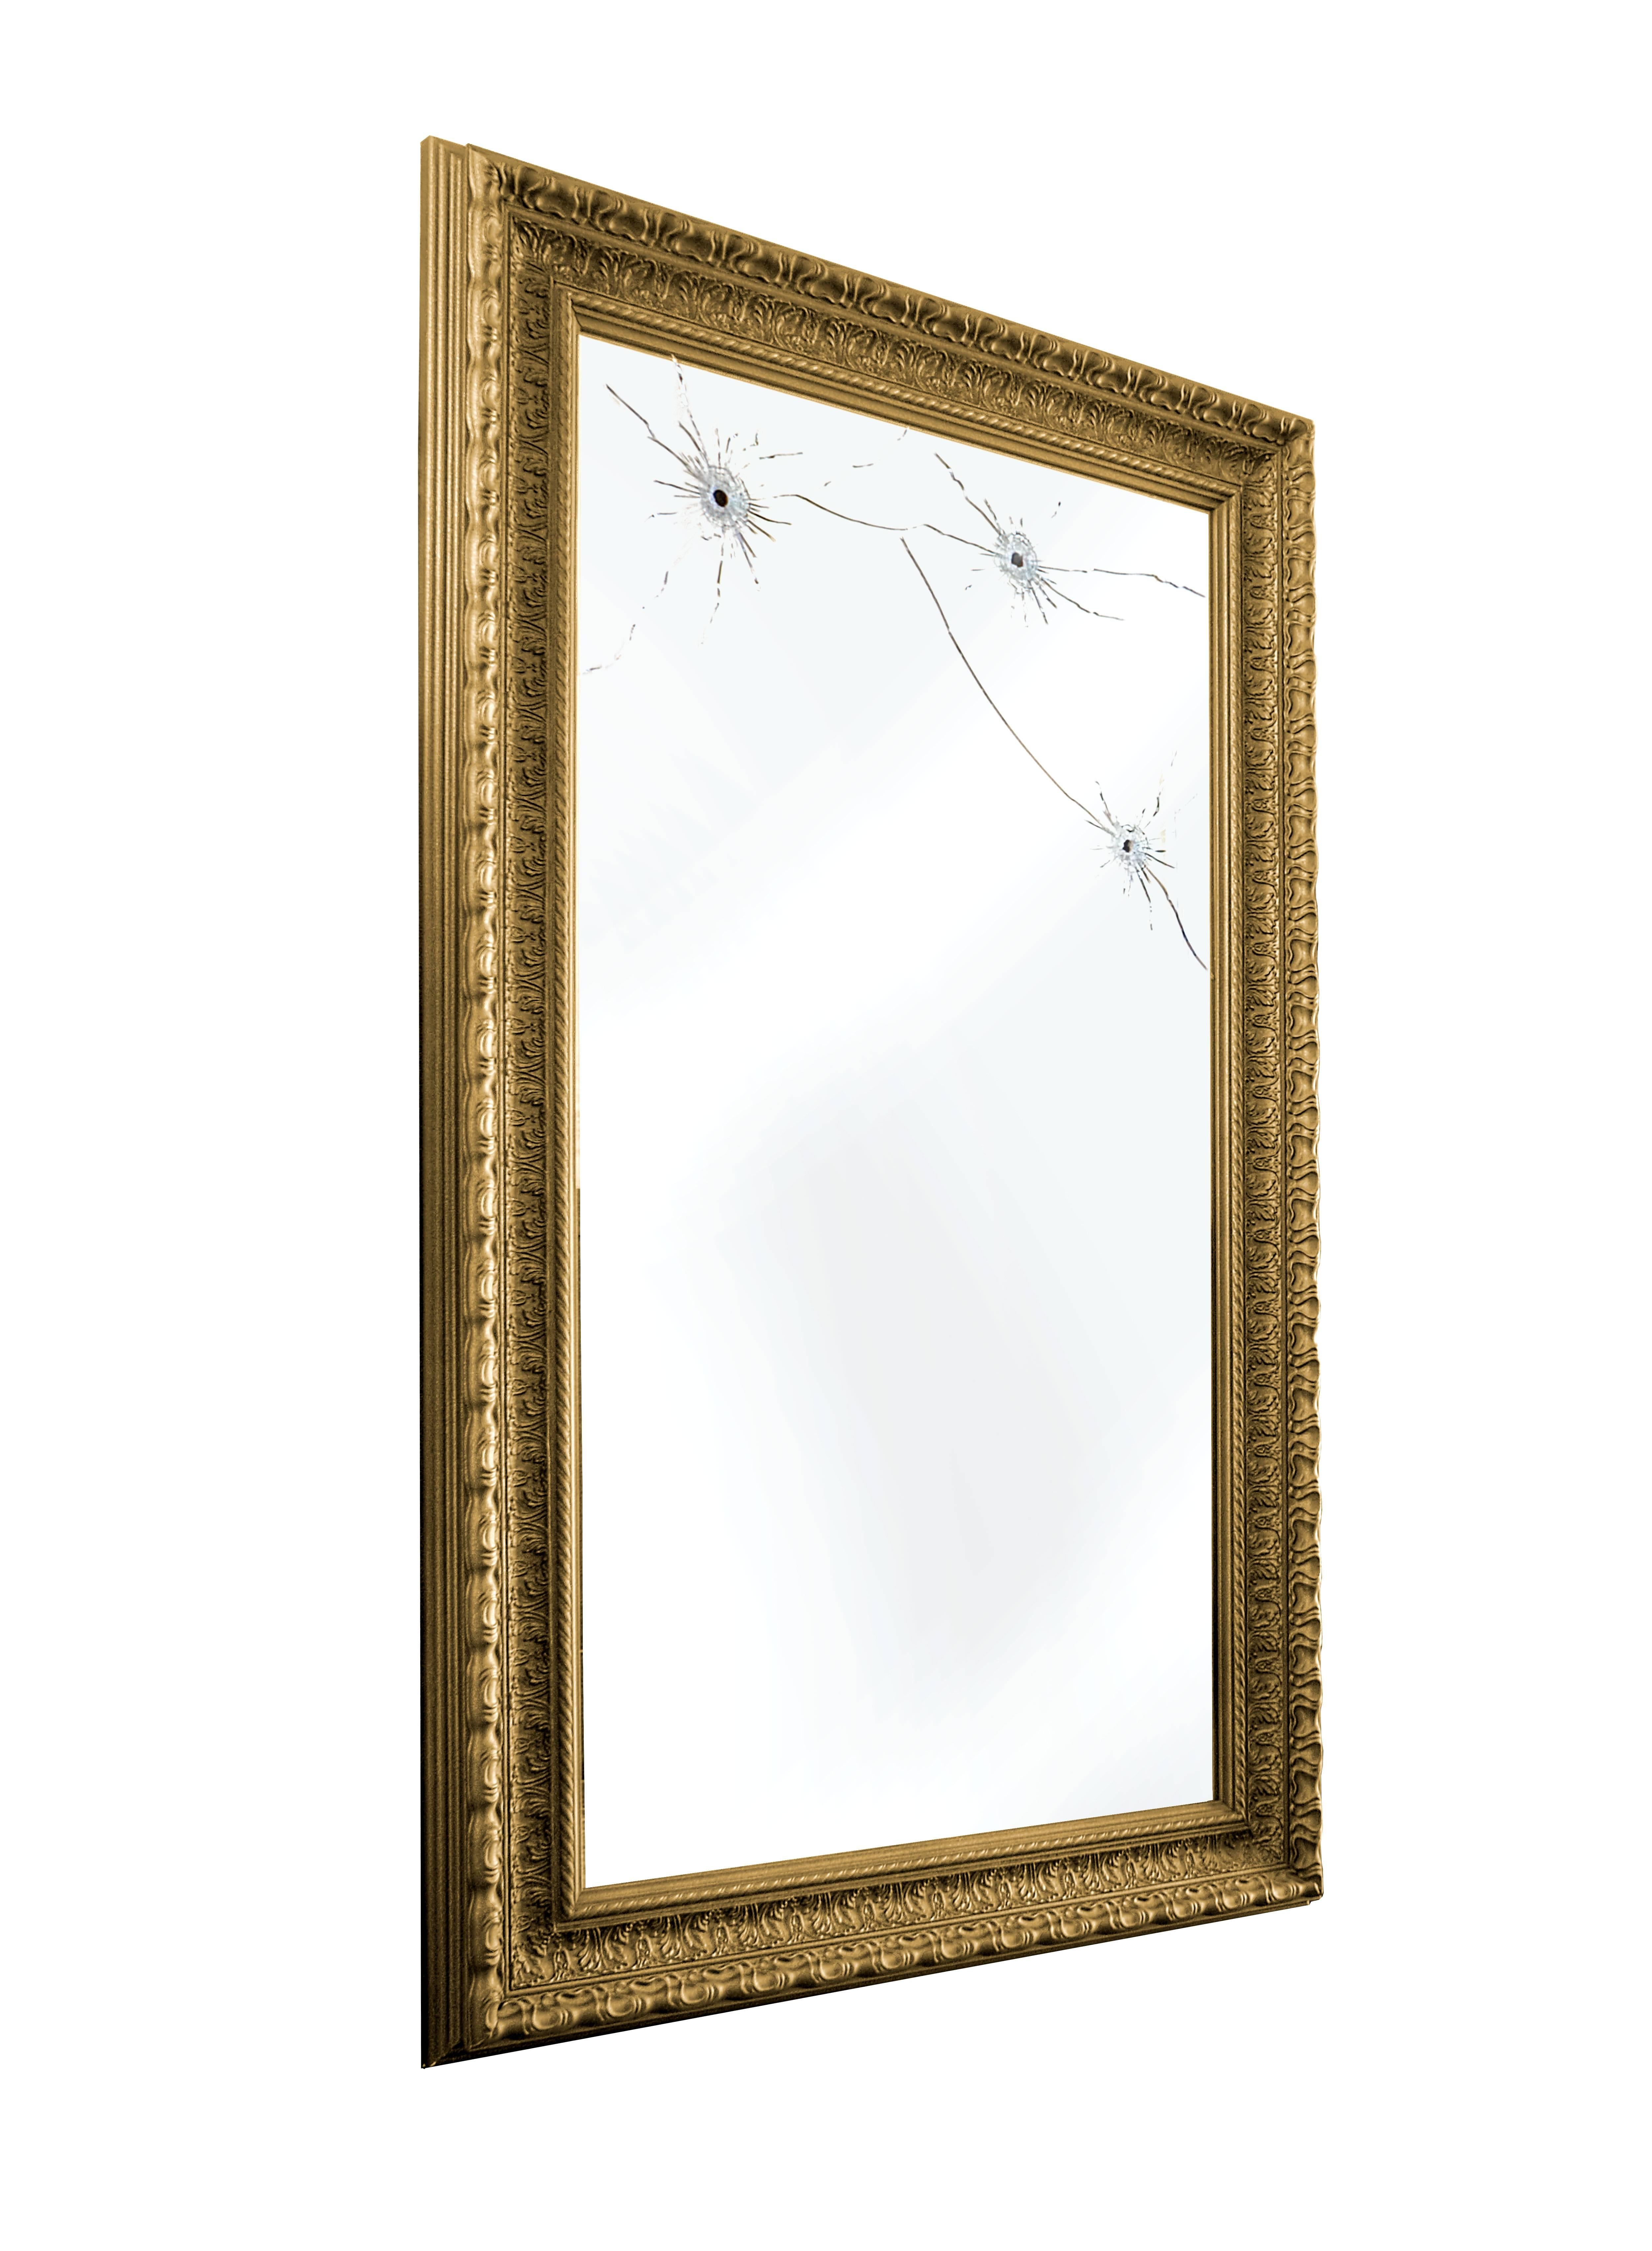 Contemporary Wall Mirror Full-Length Classic Rectangular Frame Anthracite Collectible Italy For Sale